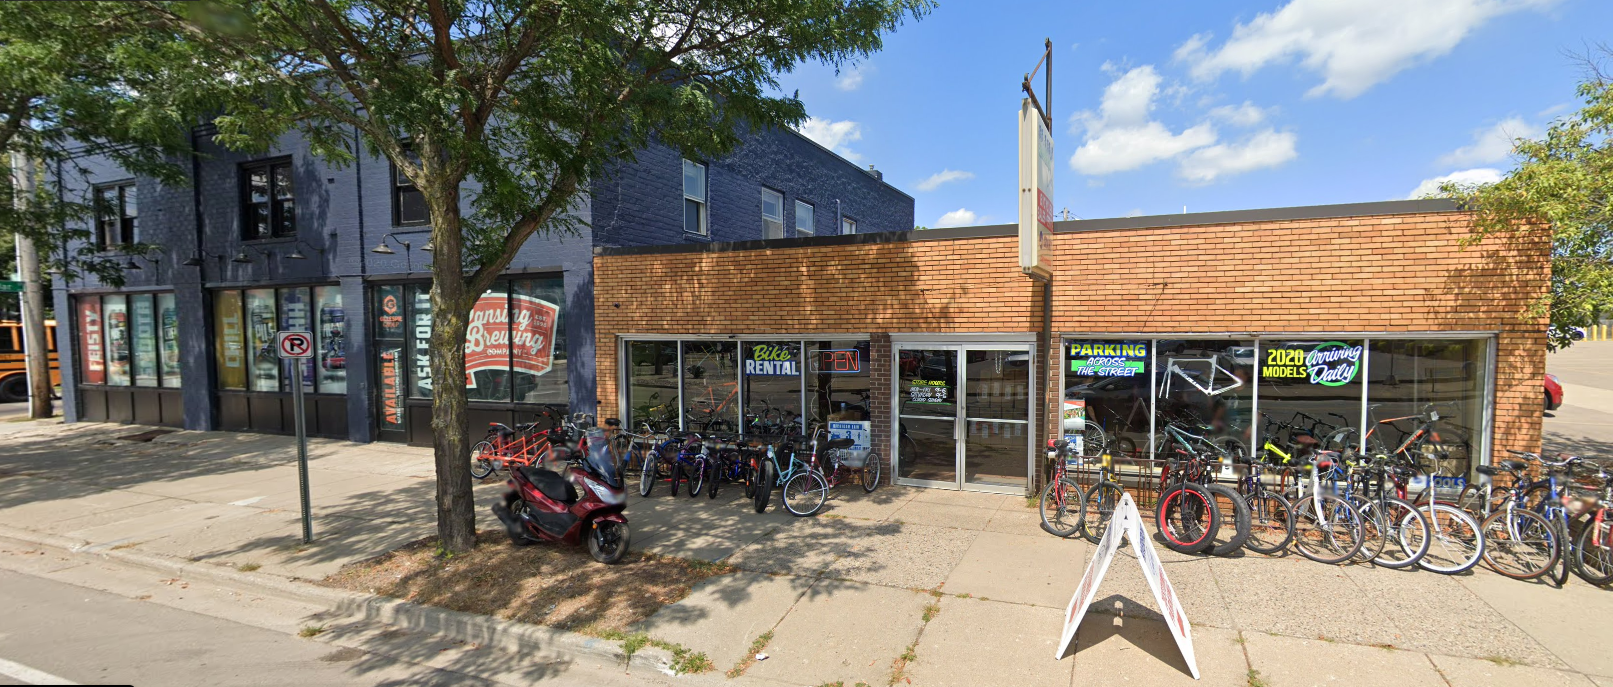 507 E Shiawassee St, now available to lease